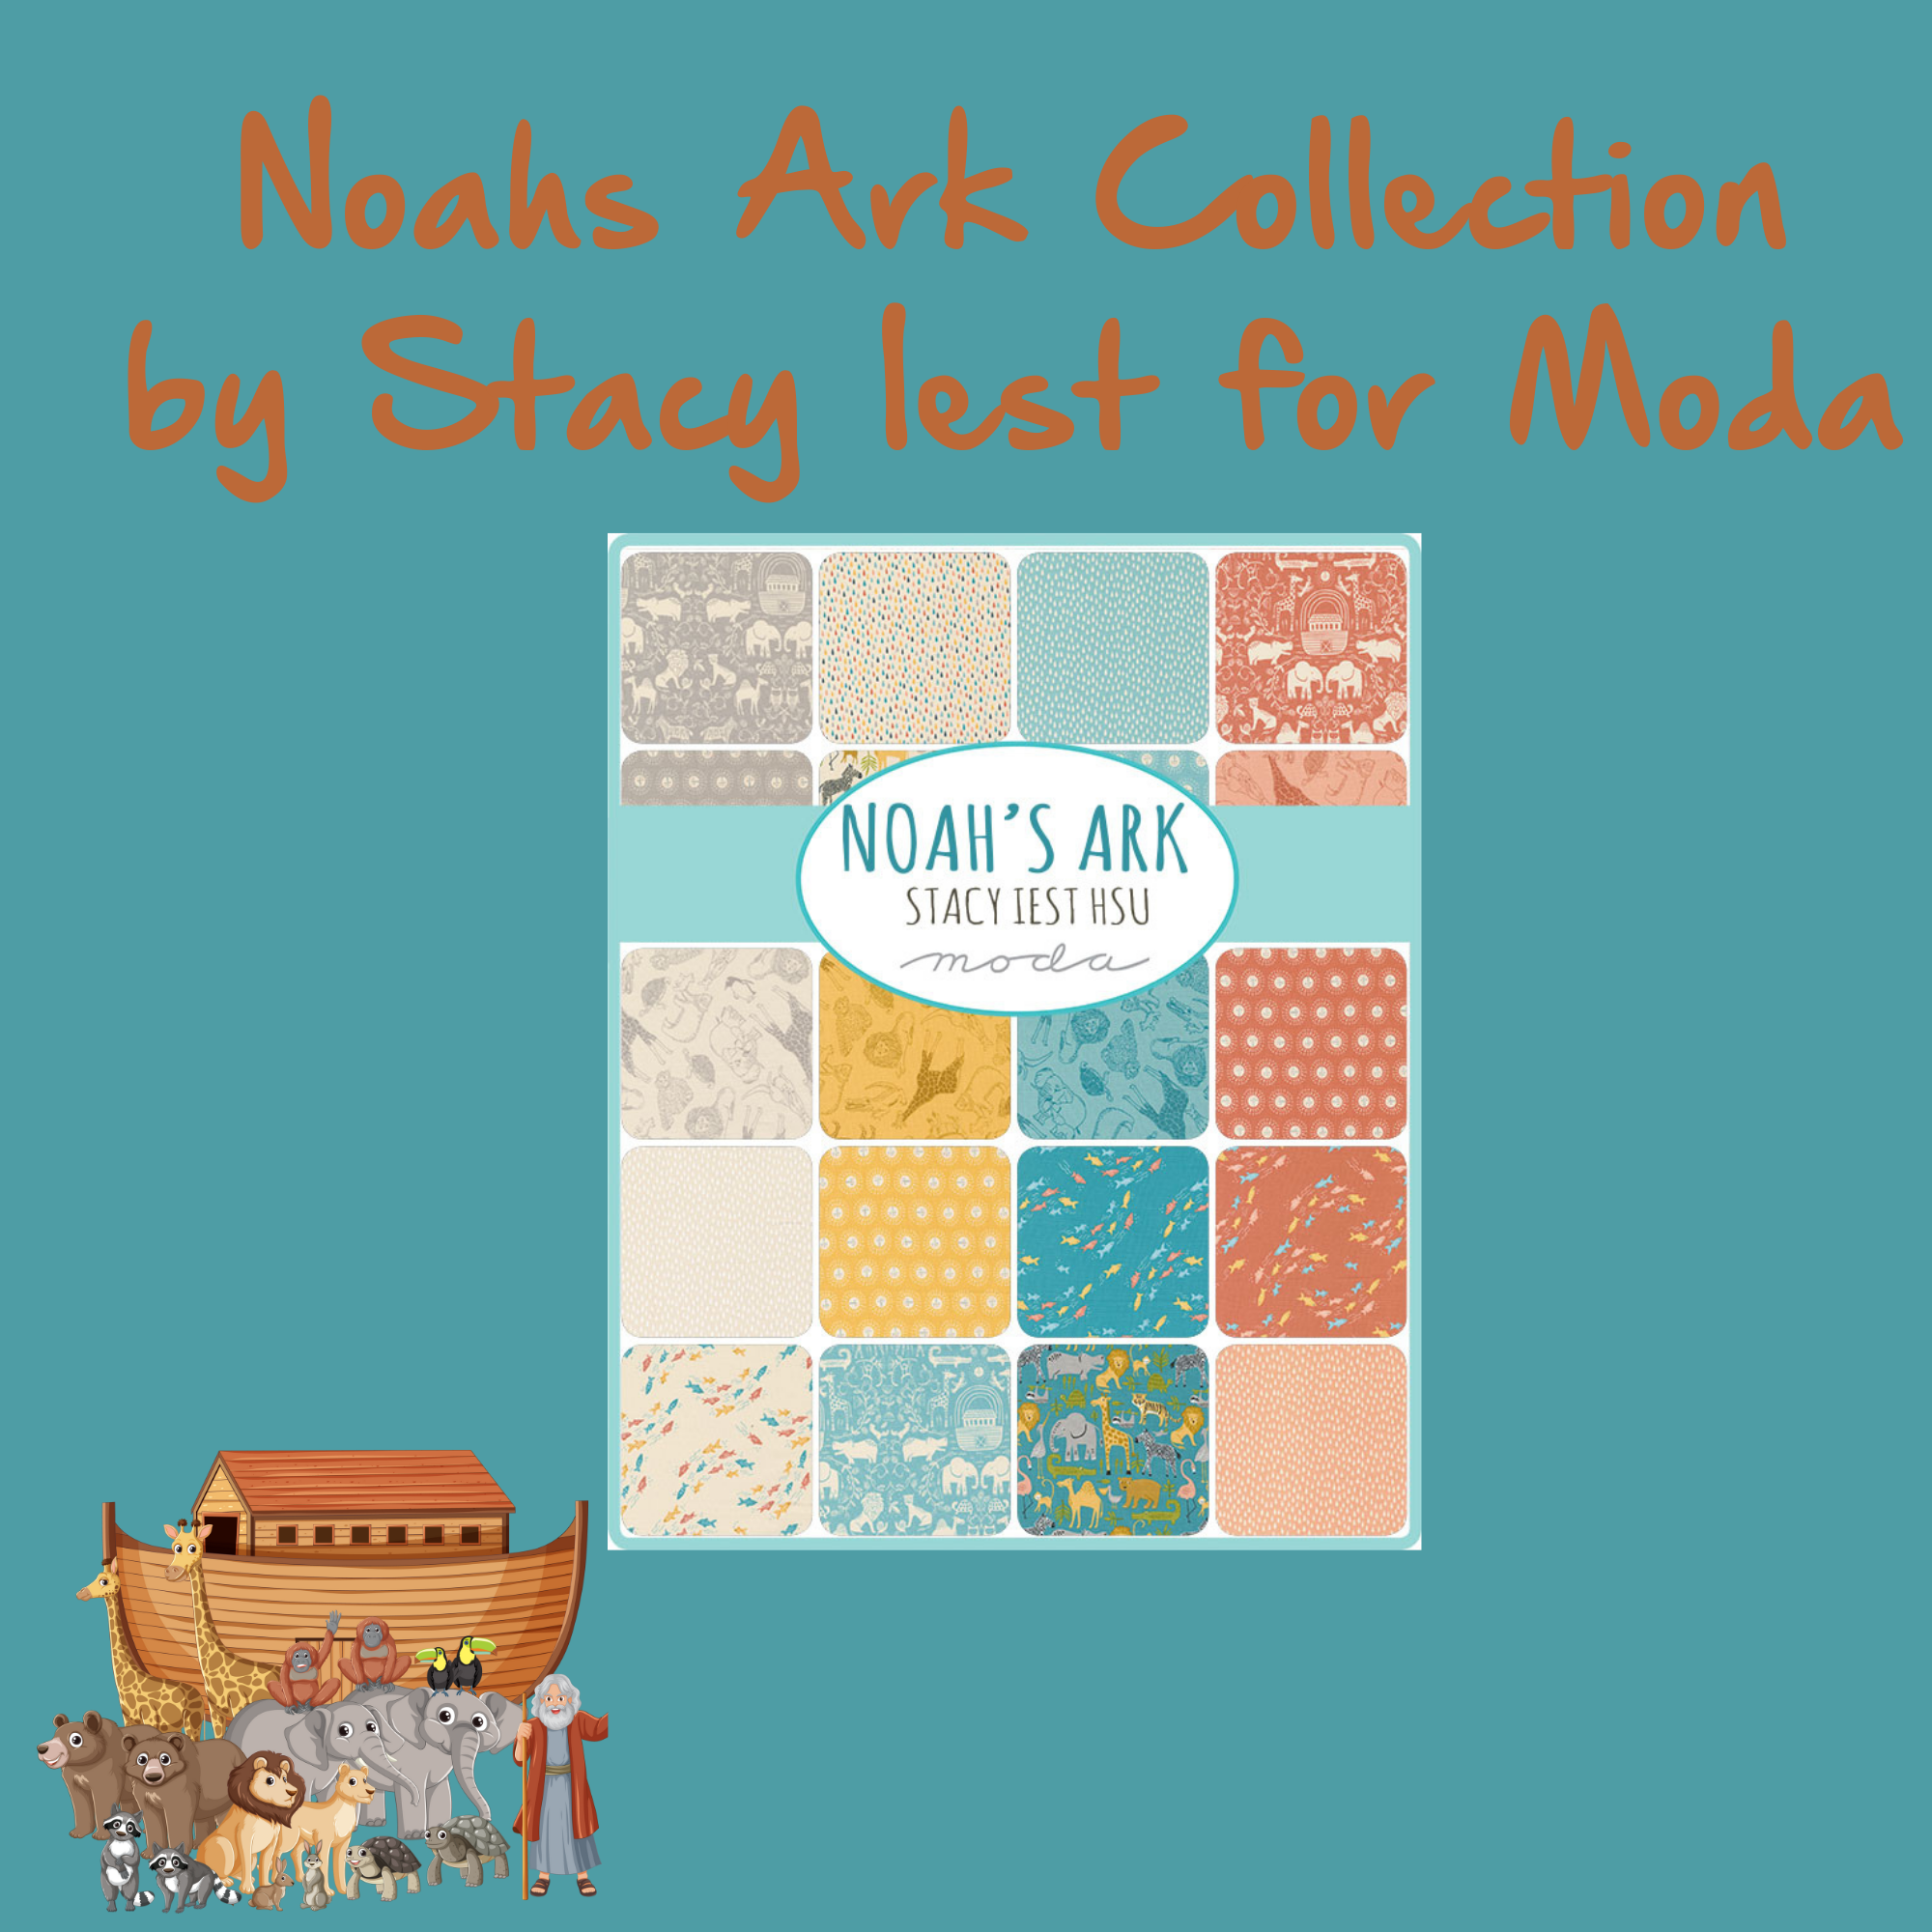 Moda ~ Noahs Ark Collection by Stacy Iest